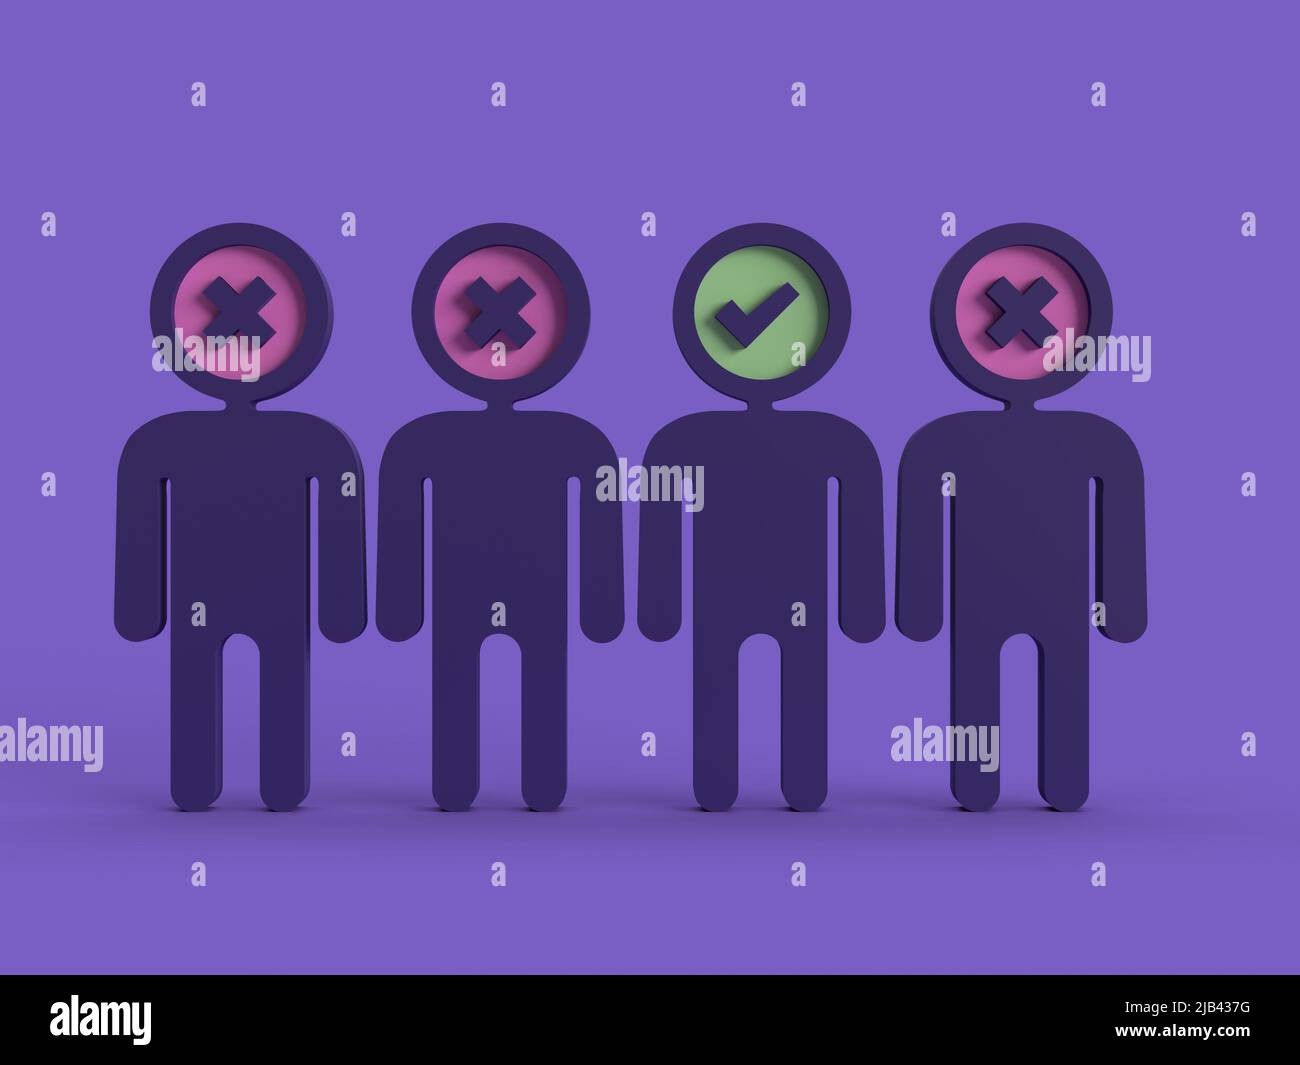 3 out of 4 people rejected - find the best candidate 3d illustration Stock Photo